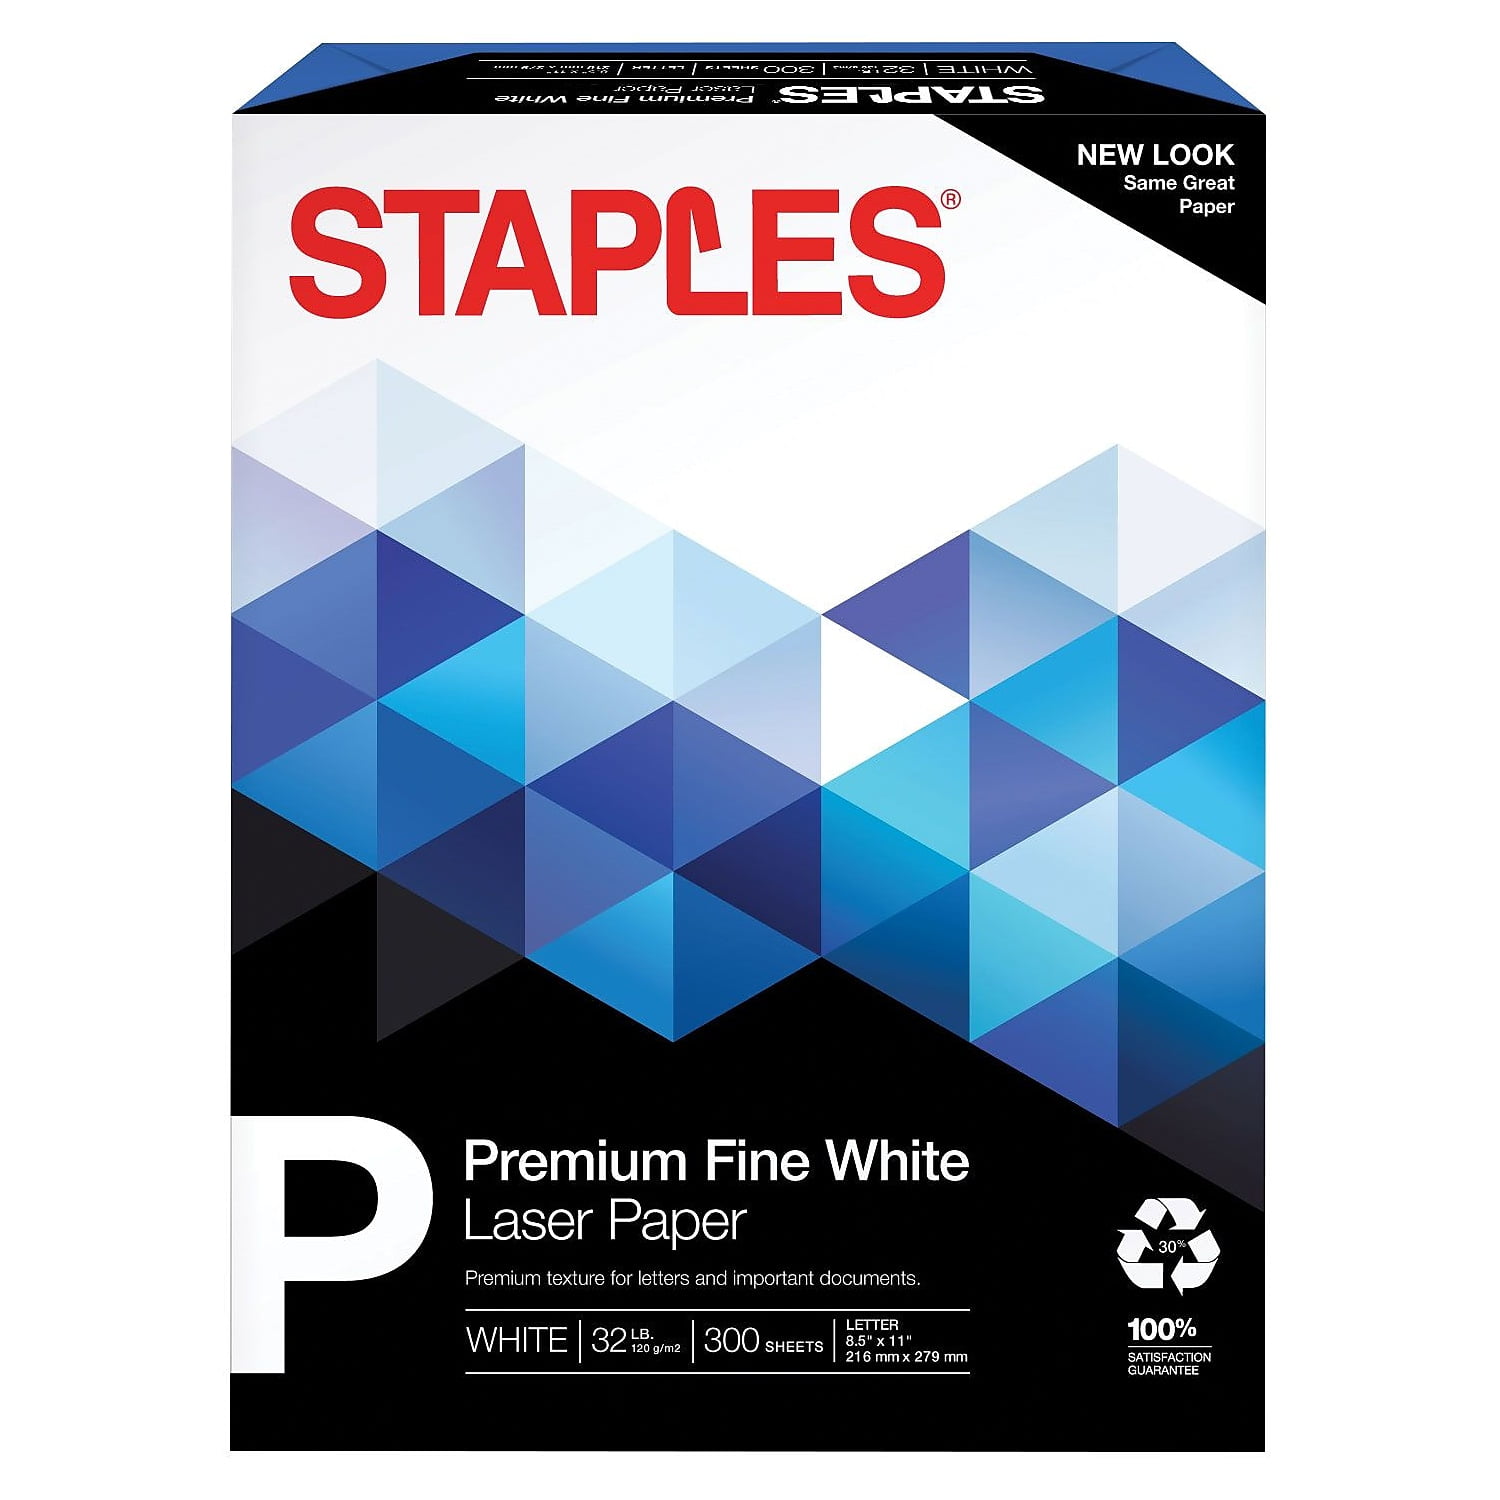 Staples Recycled Pastel Multipurpose Paper, 20 lbs., 8.5 x 11, Assorted,  400/Pack (14804), Staples